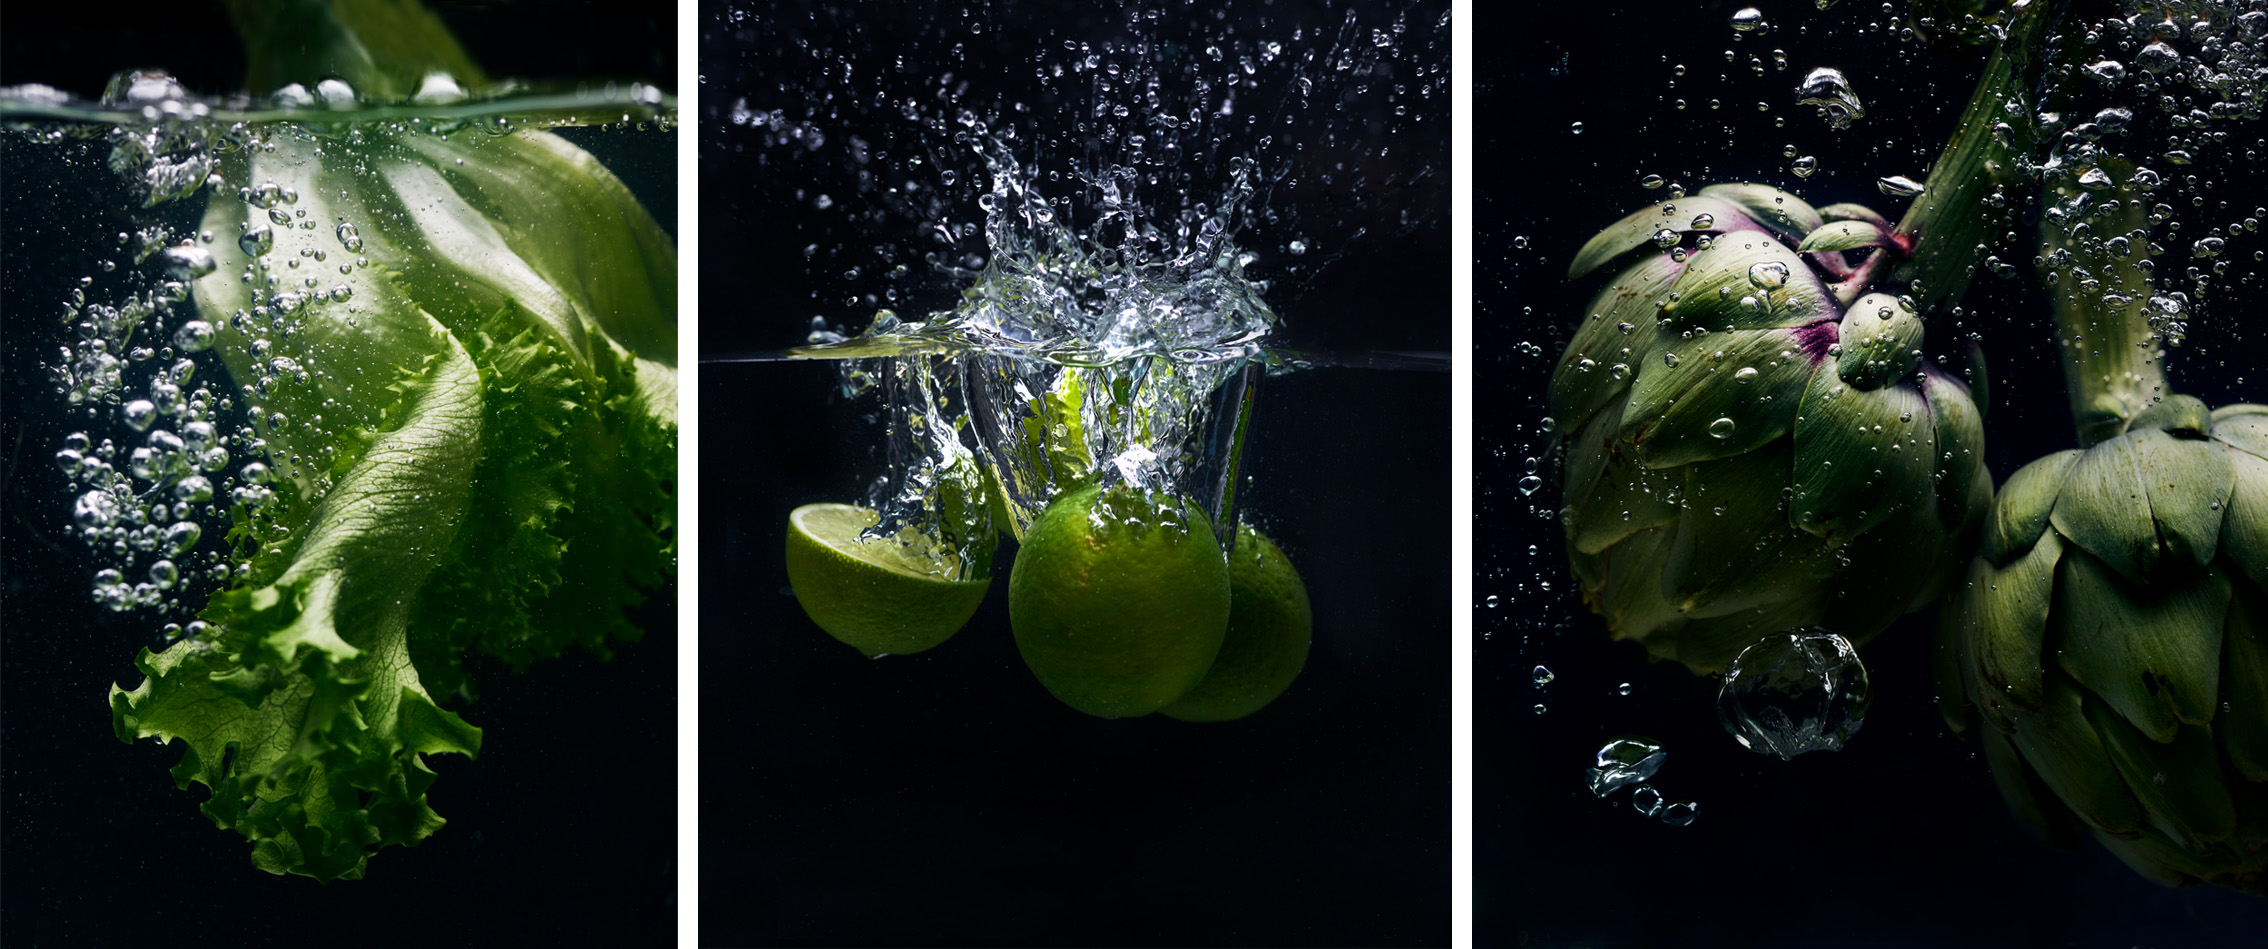 Fruit In Water Photo Shoot Showing Lettuce, Limes And Artichokes